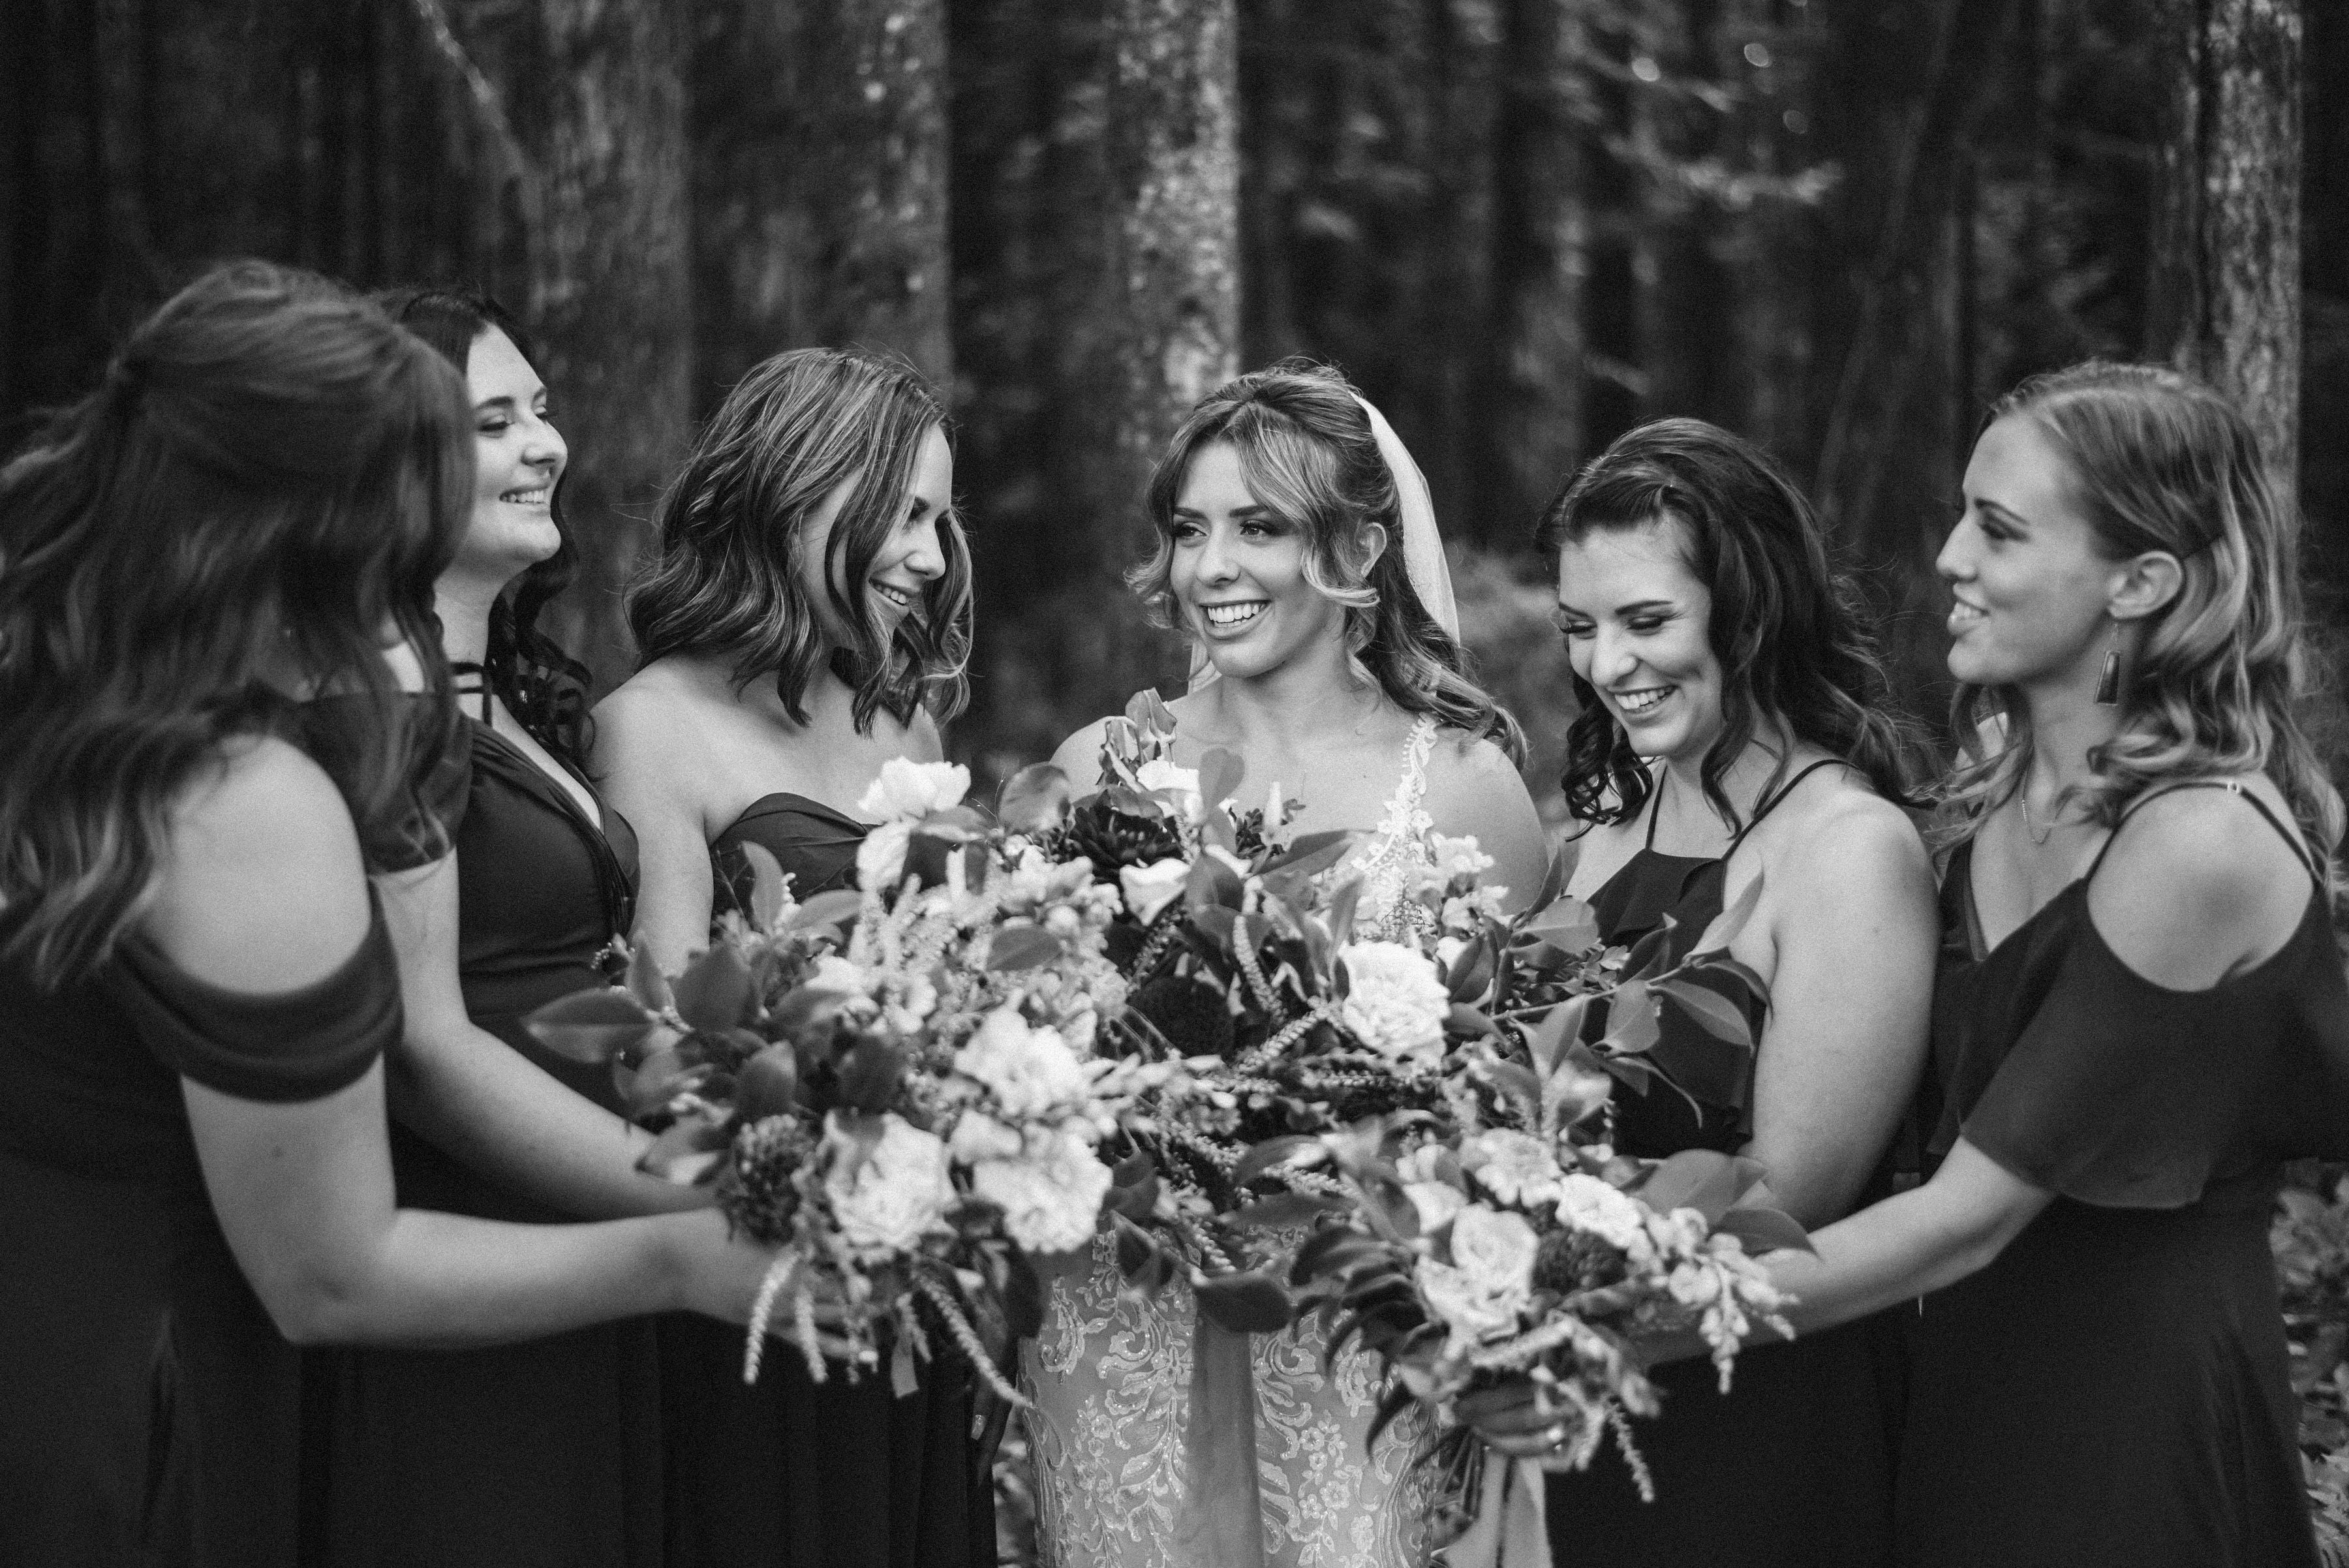 bride with bouquet surrounded by bridesmaids holding bouquets